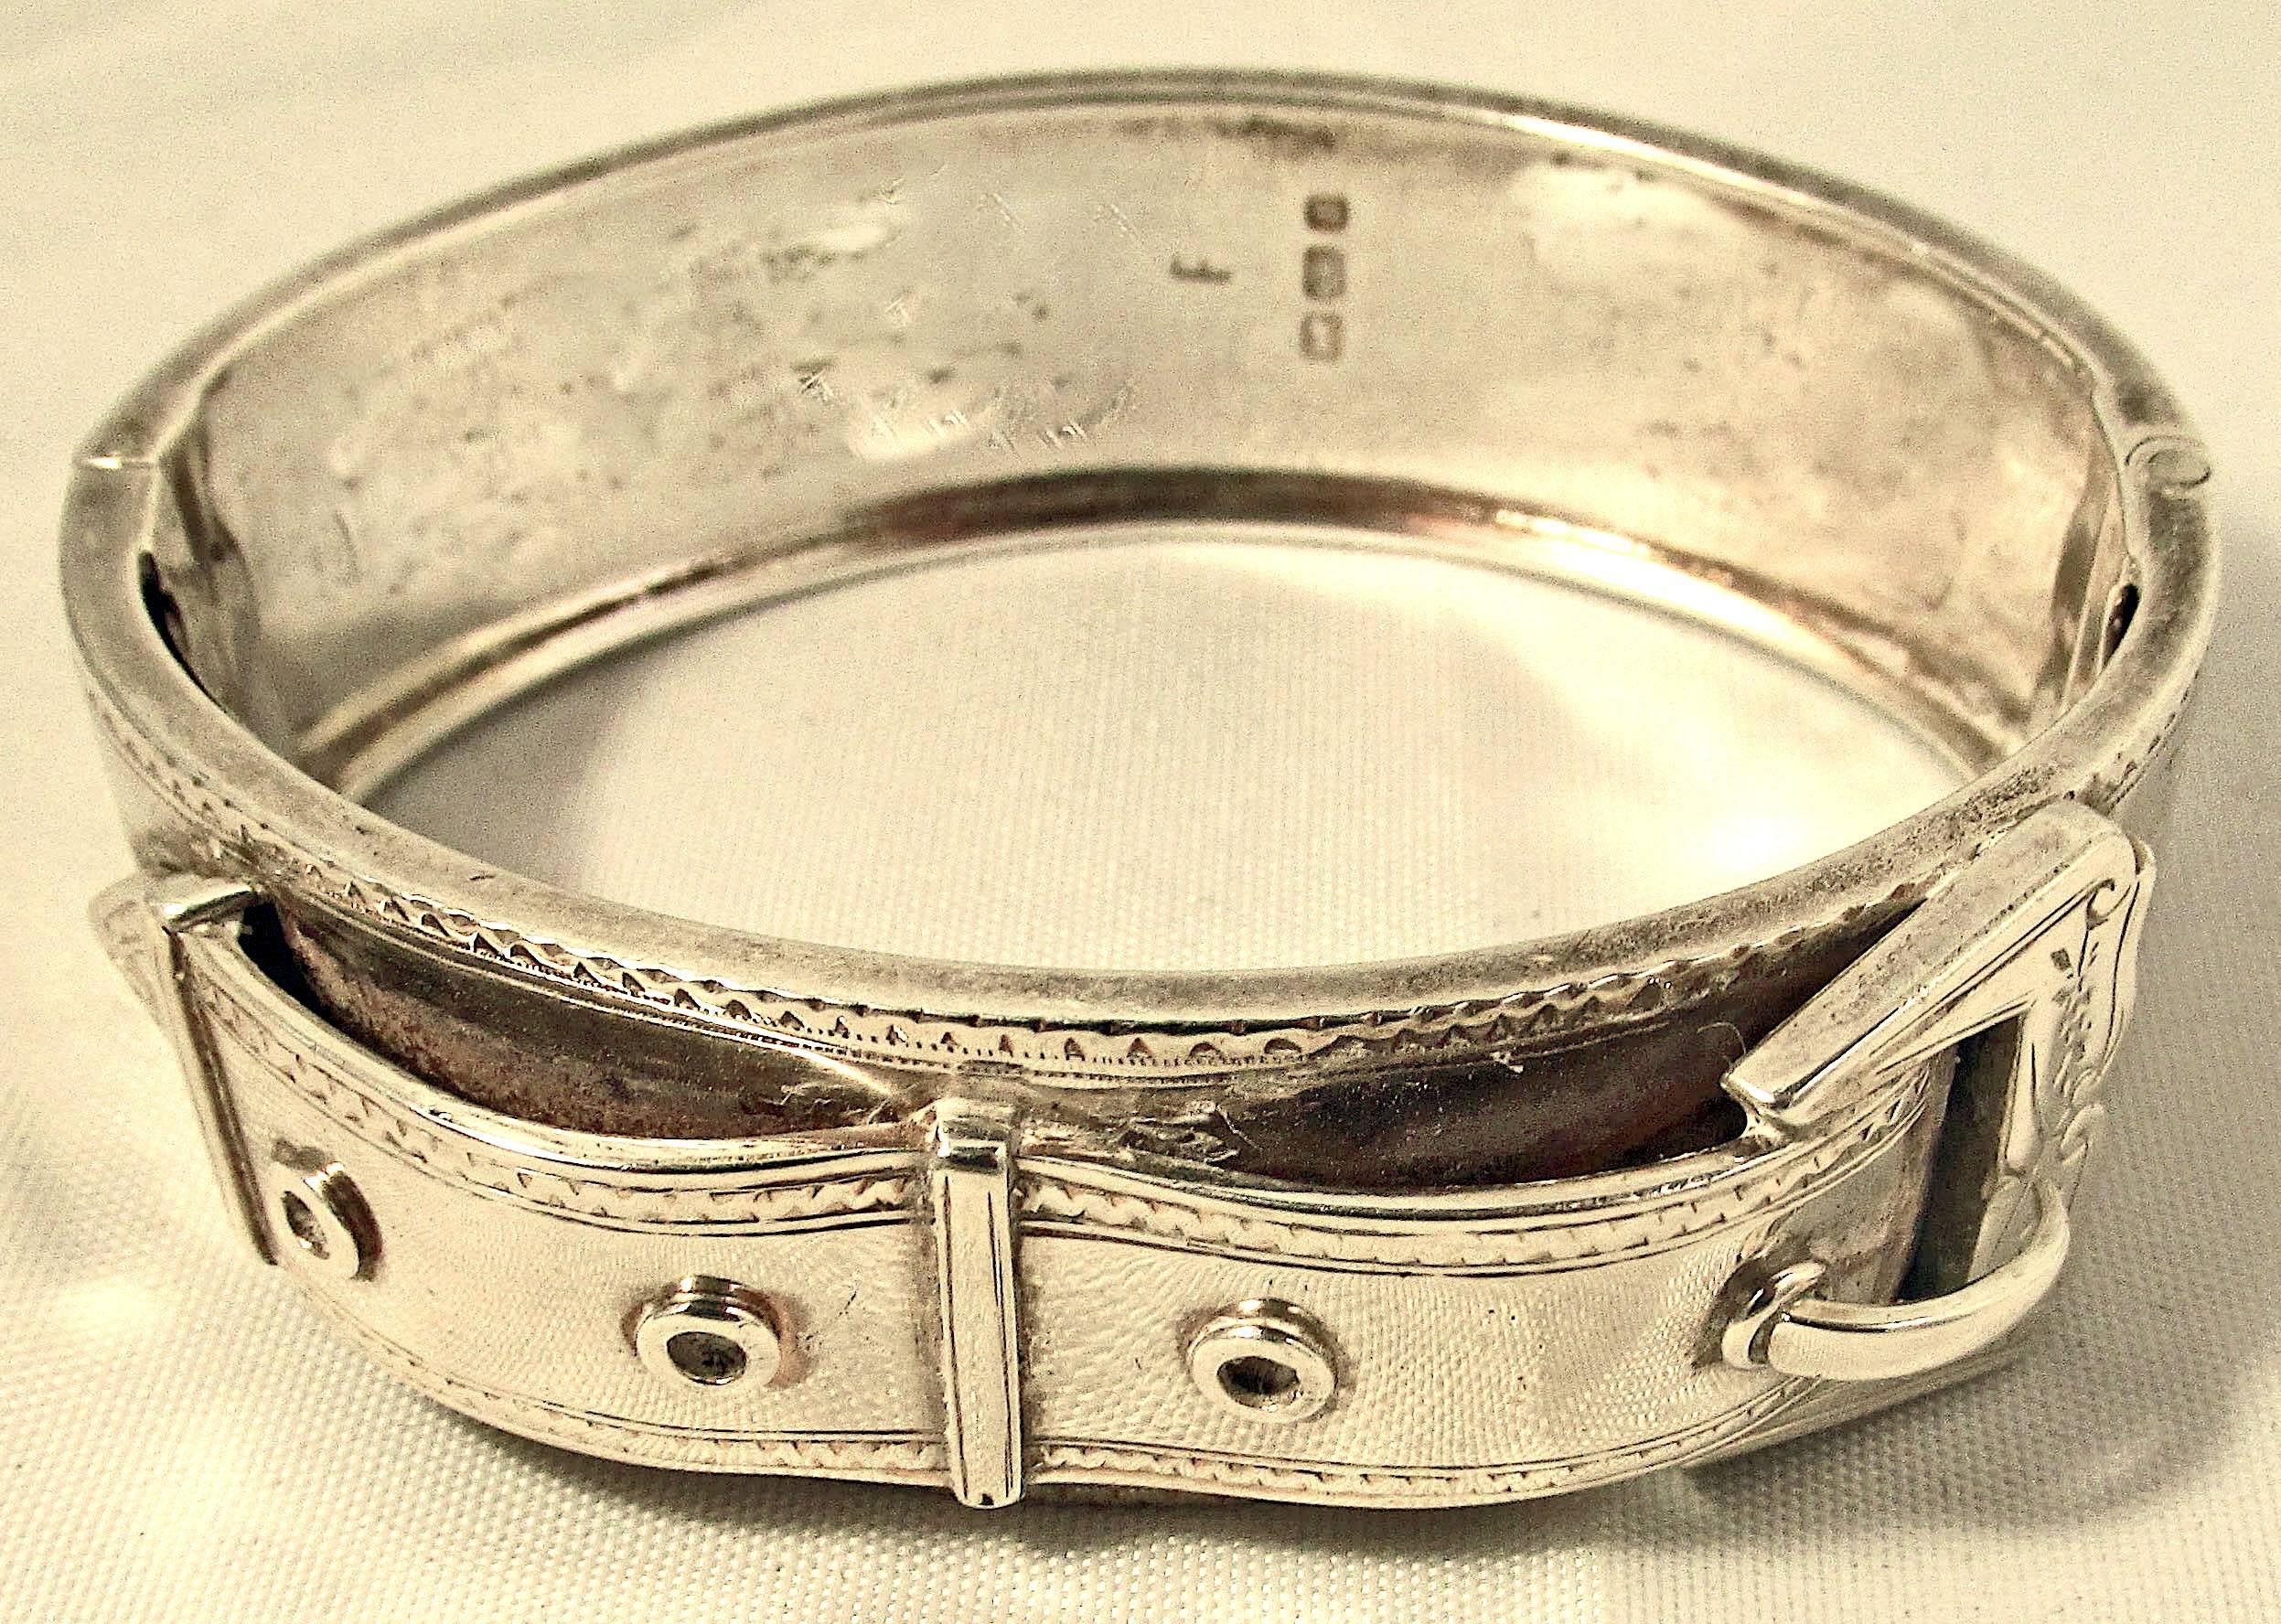 Victorian Sterling silver buckle bracelet with an engraved leaf design will be delightful to wear alone or paired with other bangles. Buckle bracelets were very popular in Victorian England as the Queen wore the order of the garter on her arm. 